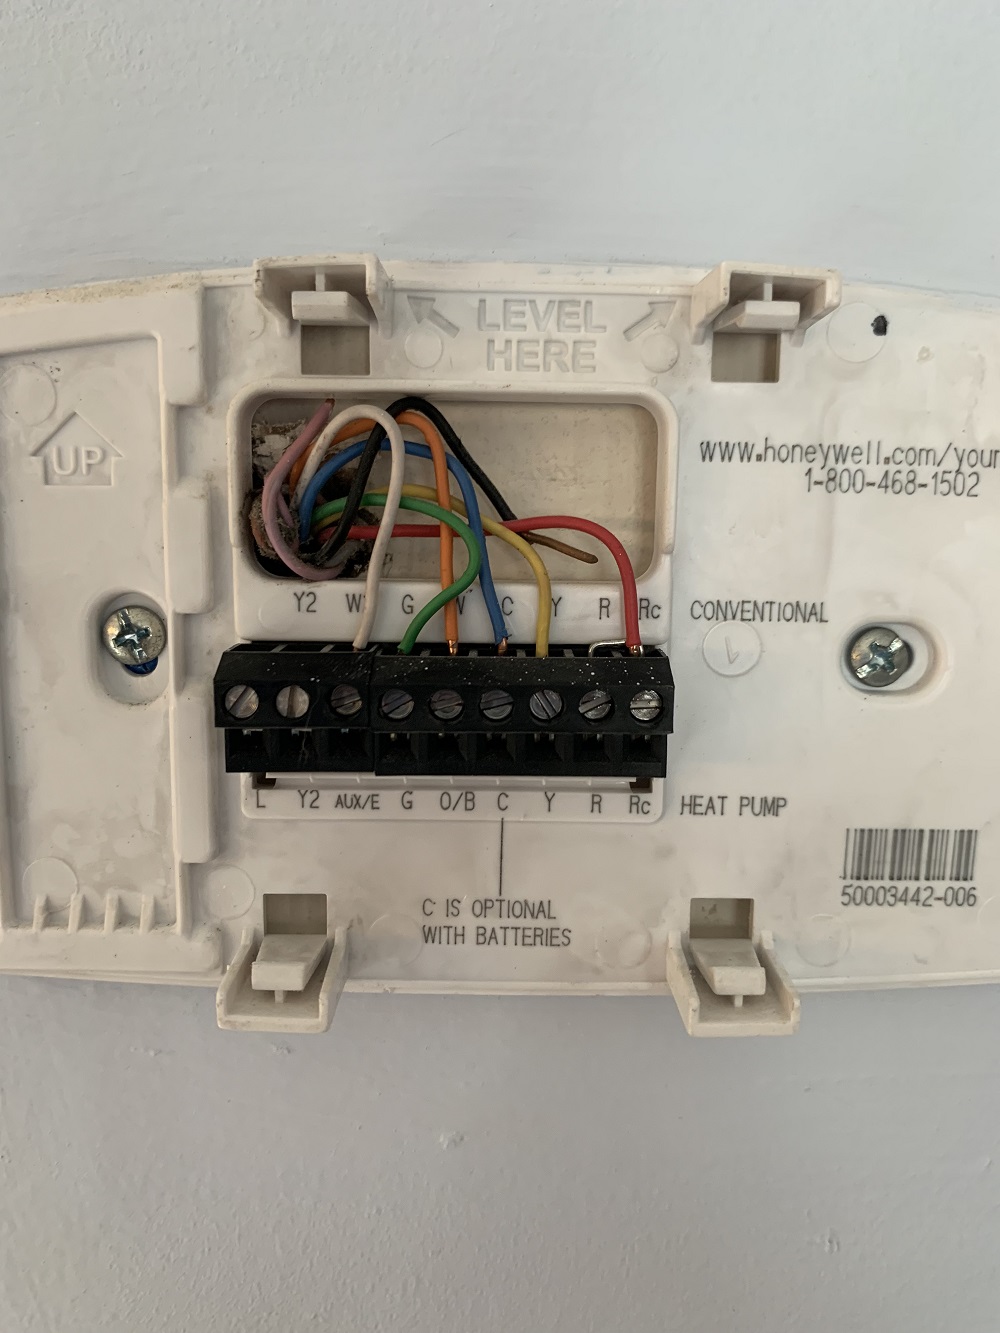 Smart Thermostat Not Cooling